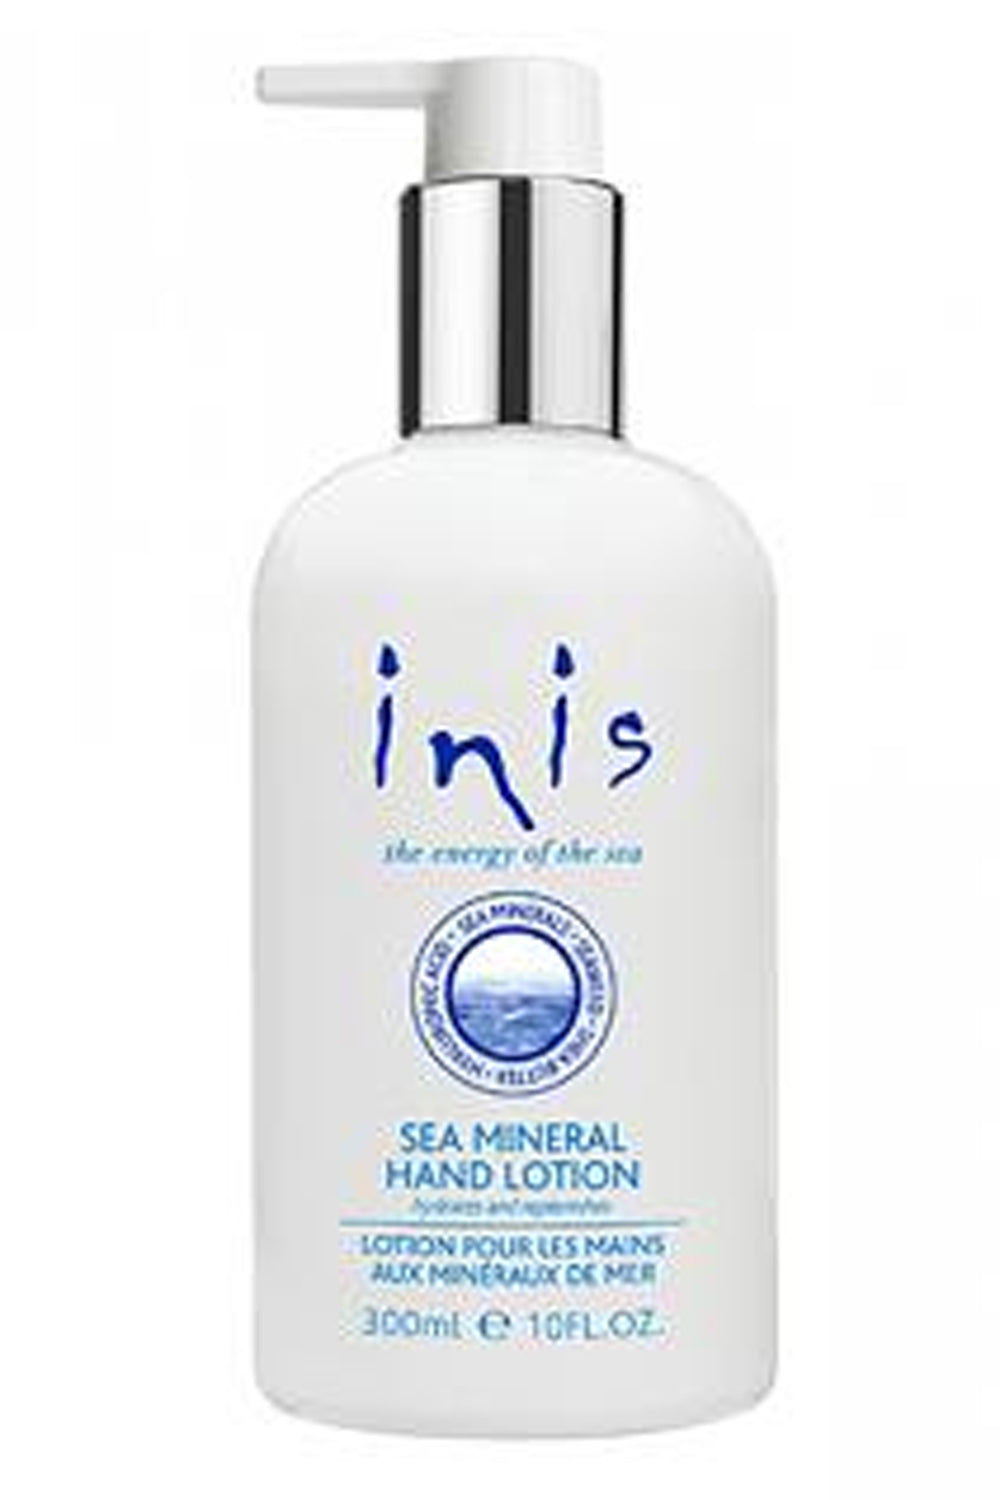 Inis "Energy of the Sea" Sea Mineral Hand Lotion